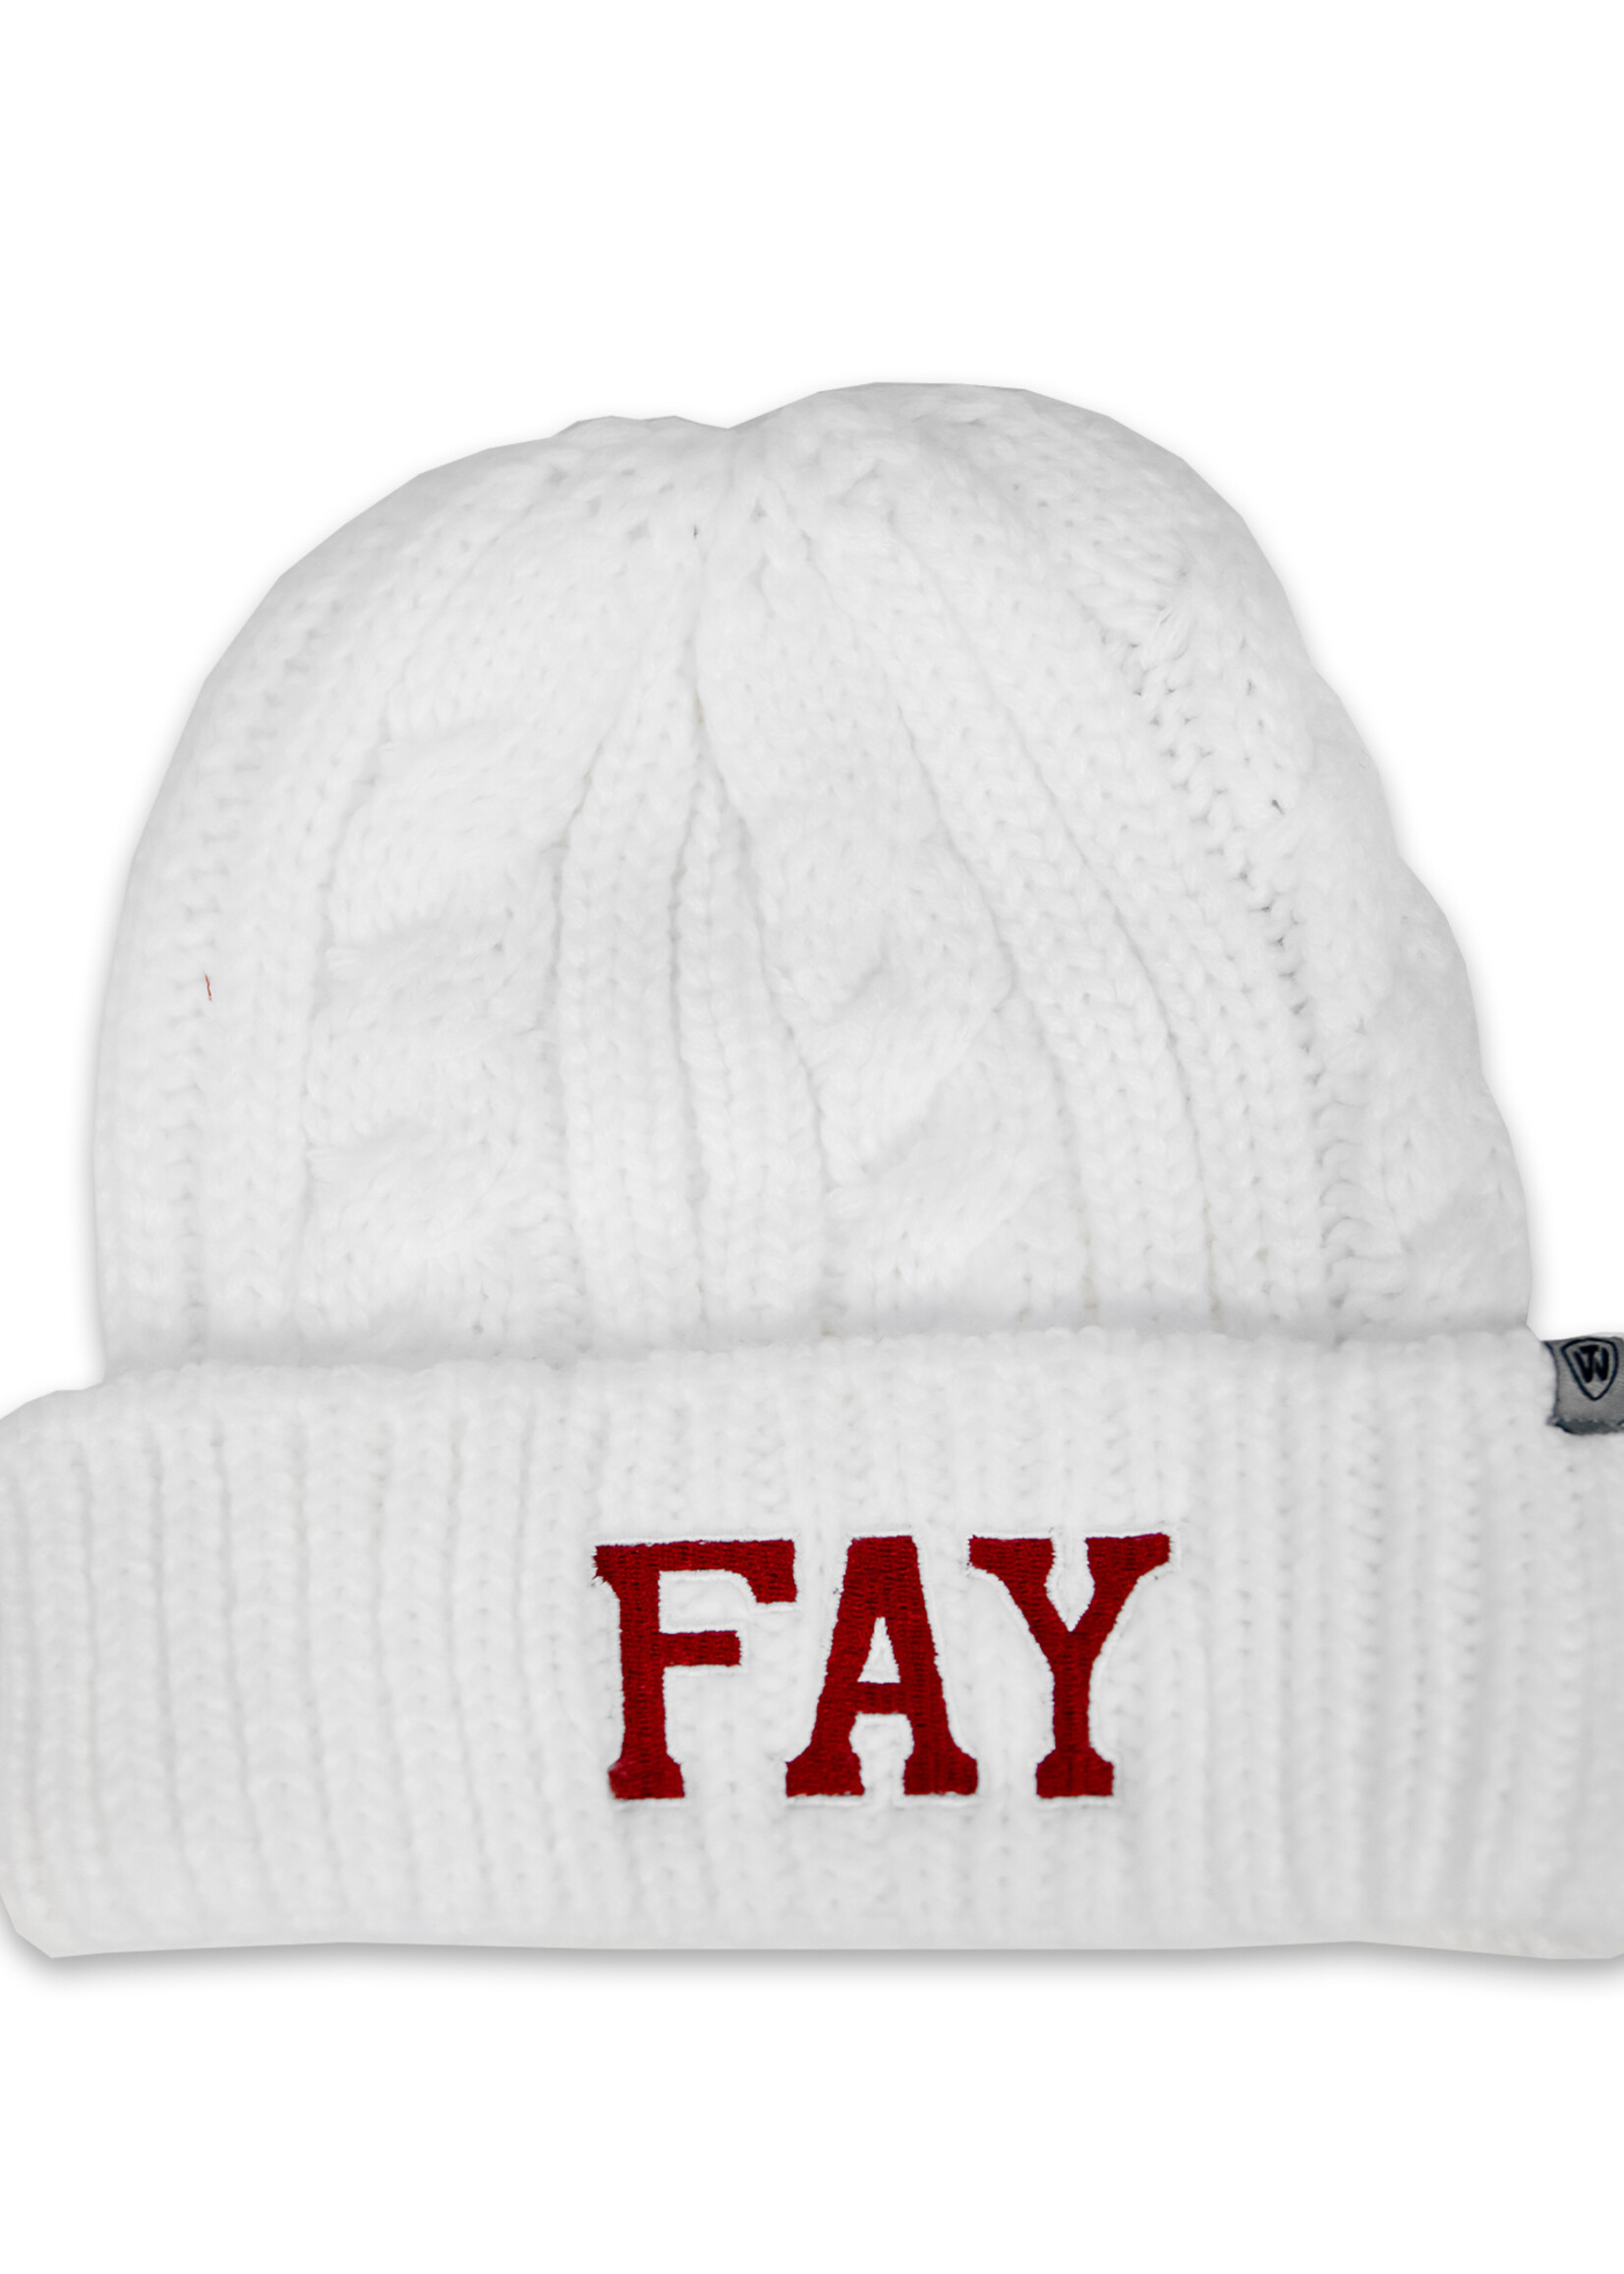 Top of the World Cable Knit Hat White